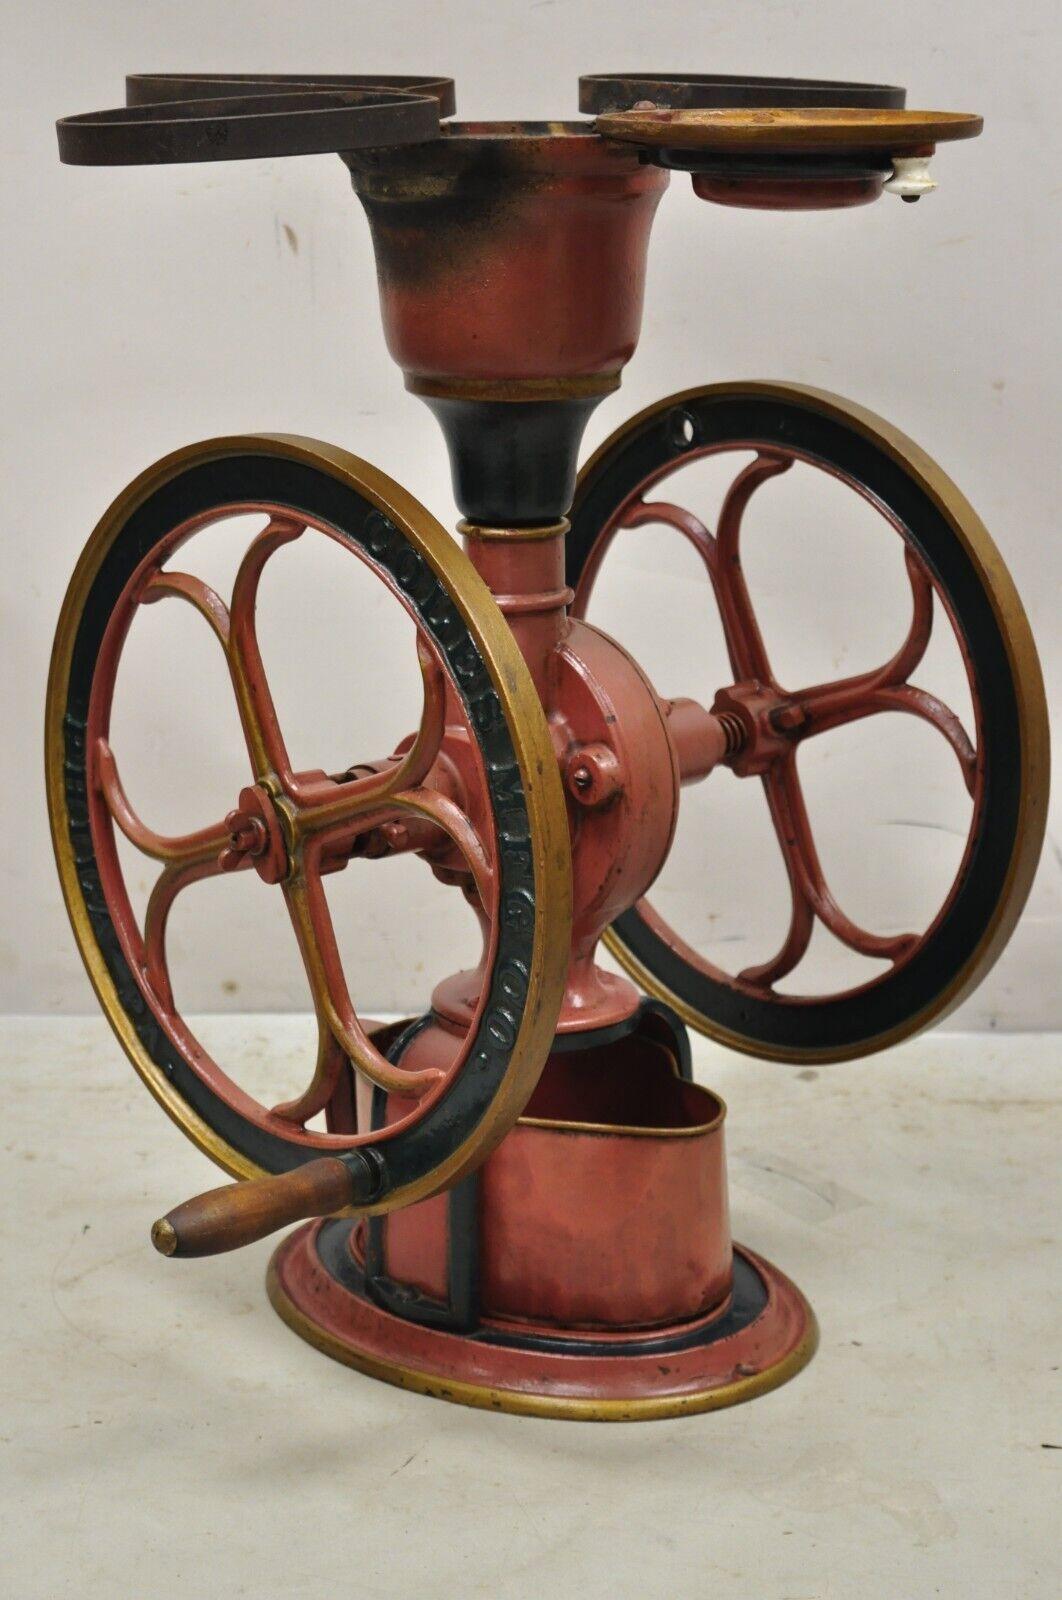 Antique Coles Mfg Co Cast Iron Red Green Victorian Large Coffee Mill Grinder. Coverted into a planter/flower pot holder. Item features a large impressive Size, original red and green painted finish (looks black in photos), cast iron construction,